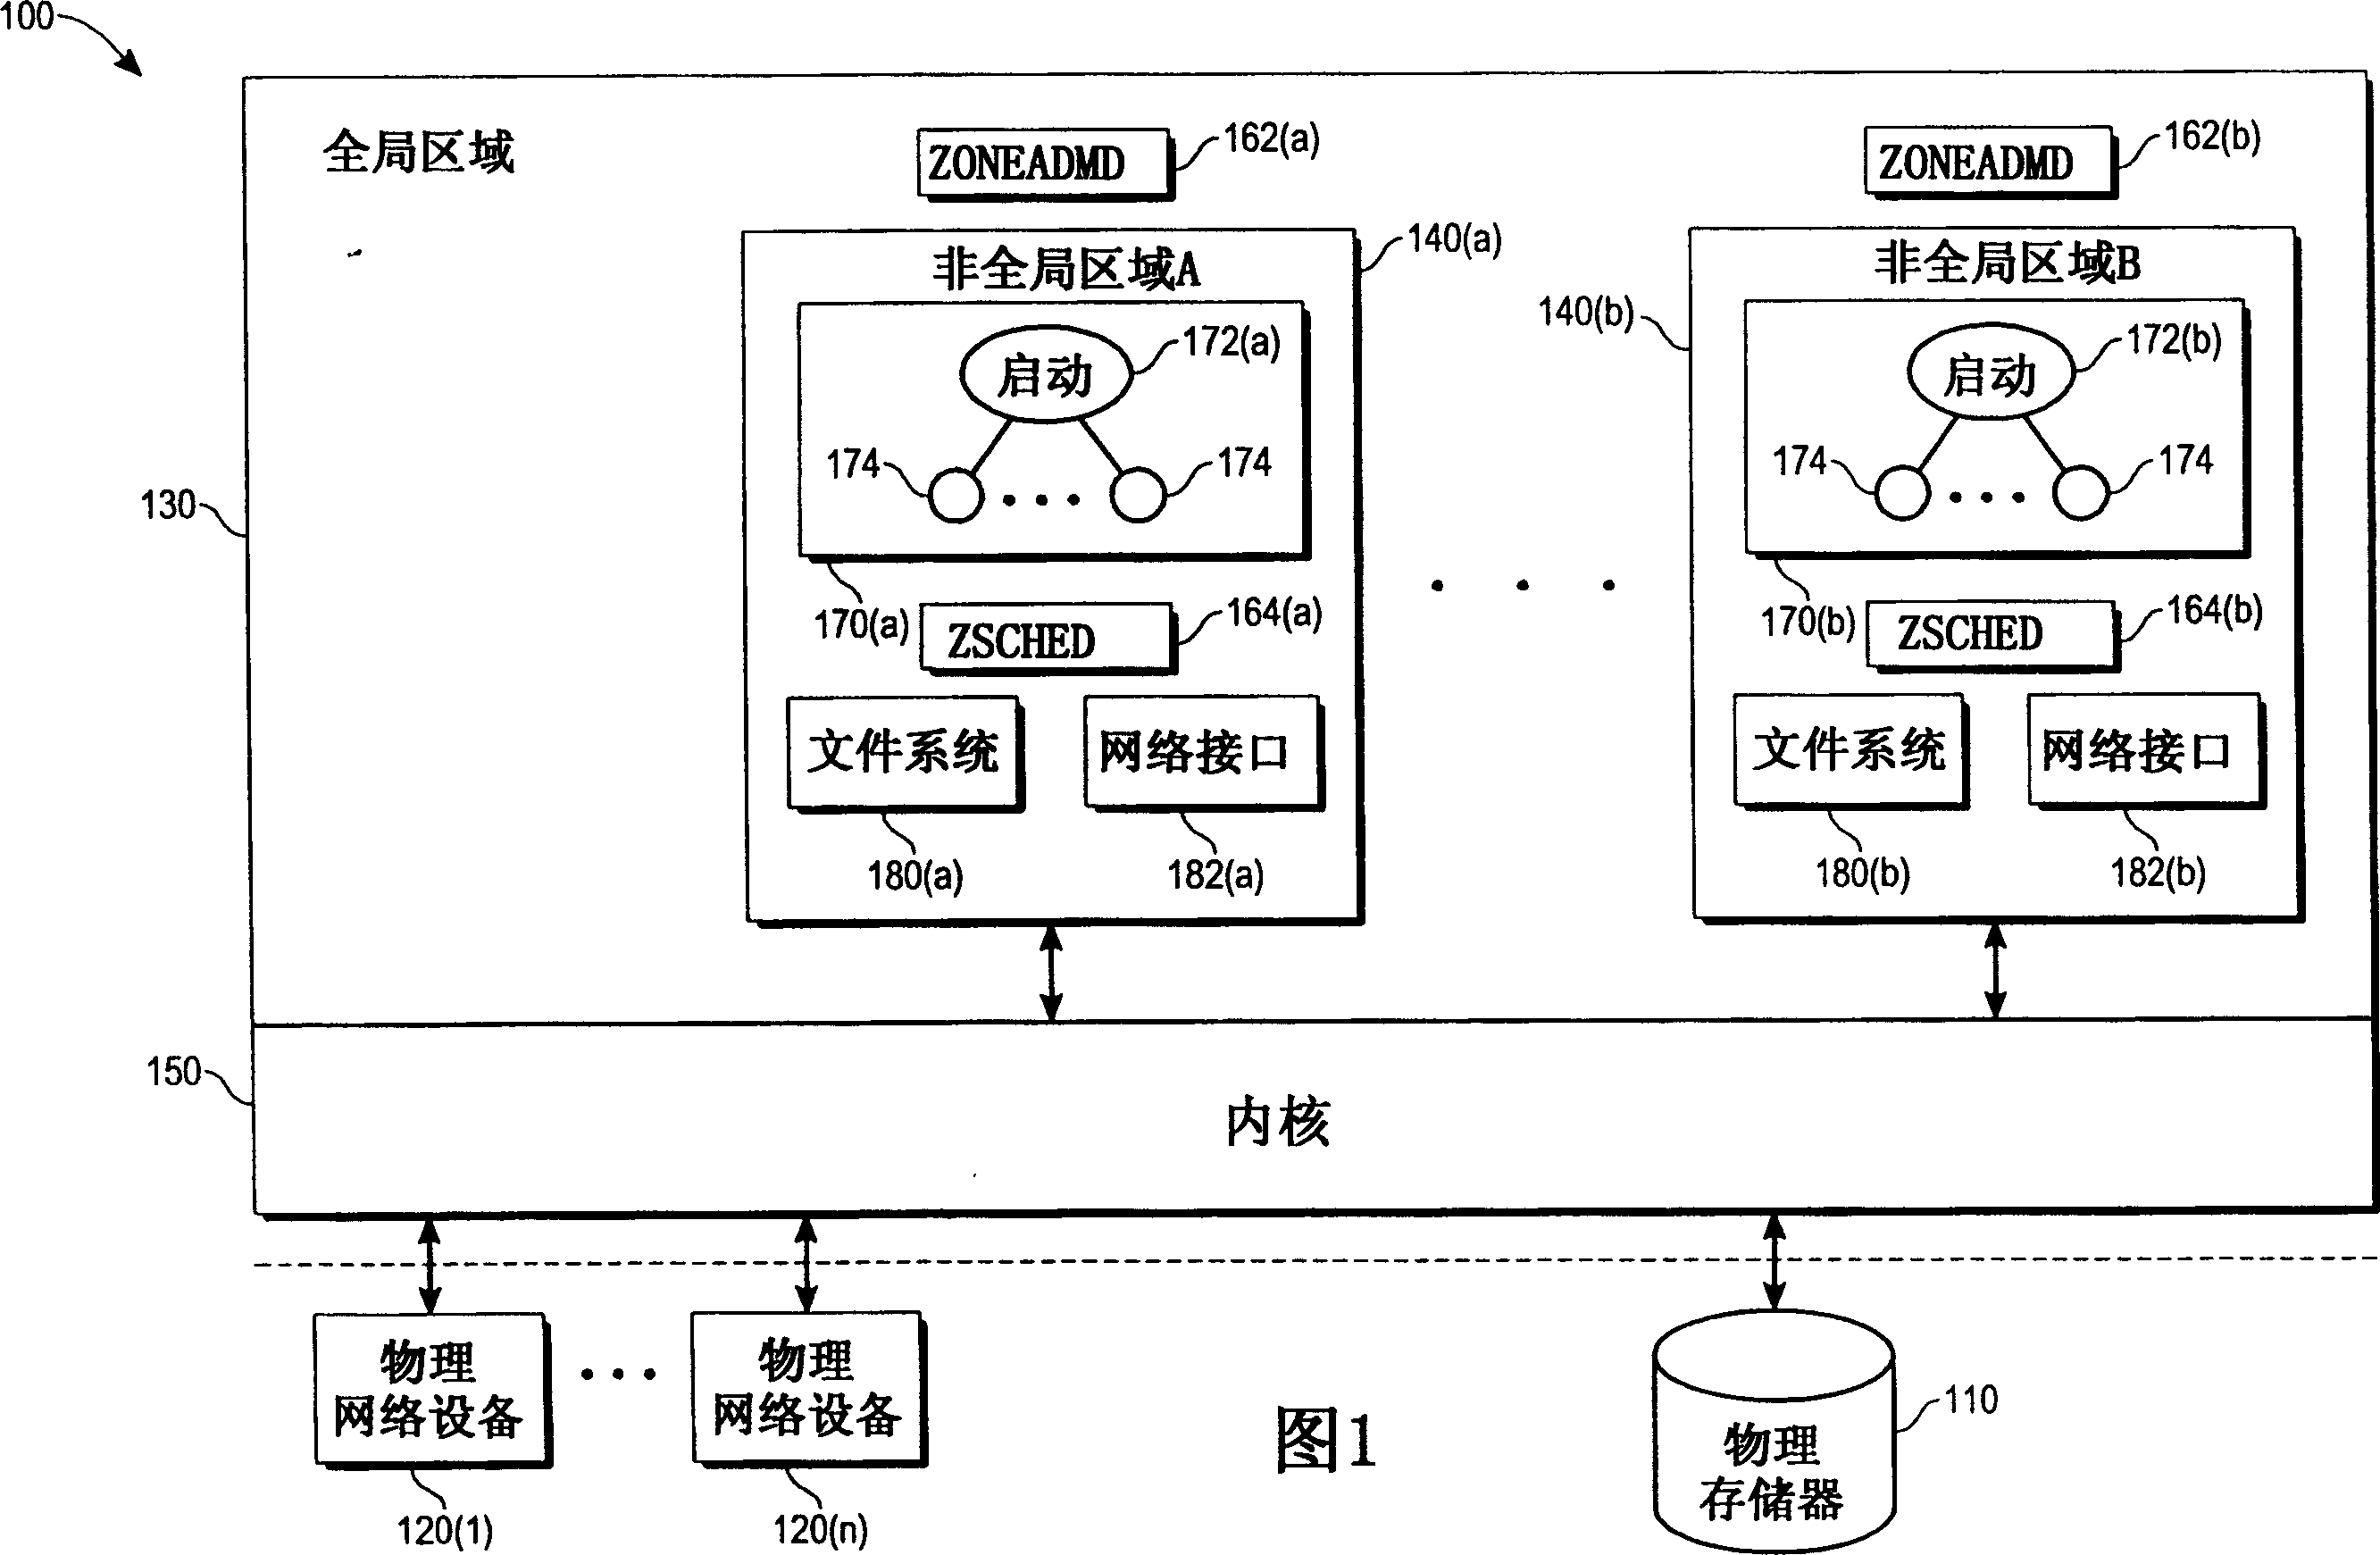 Interprocess communication in operating system partition